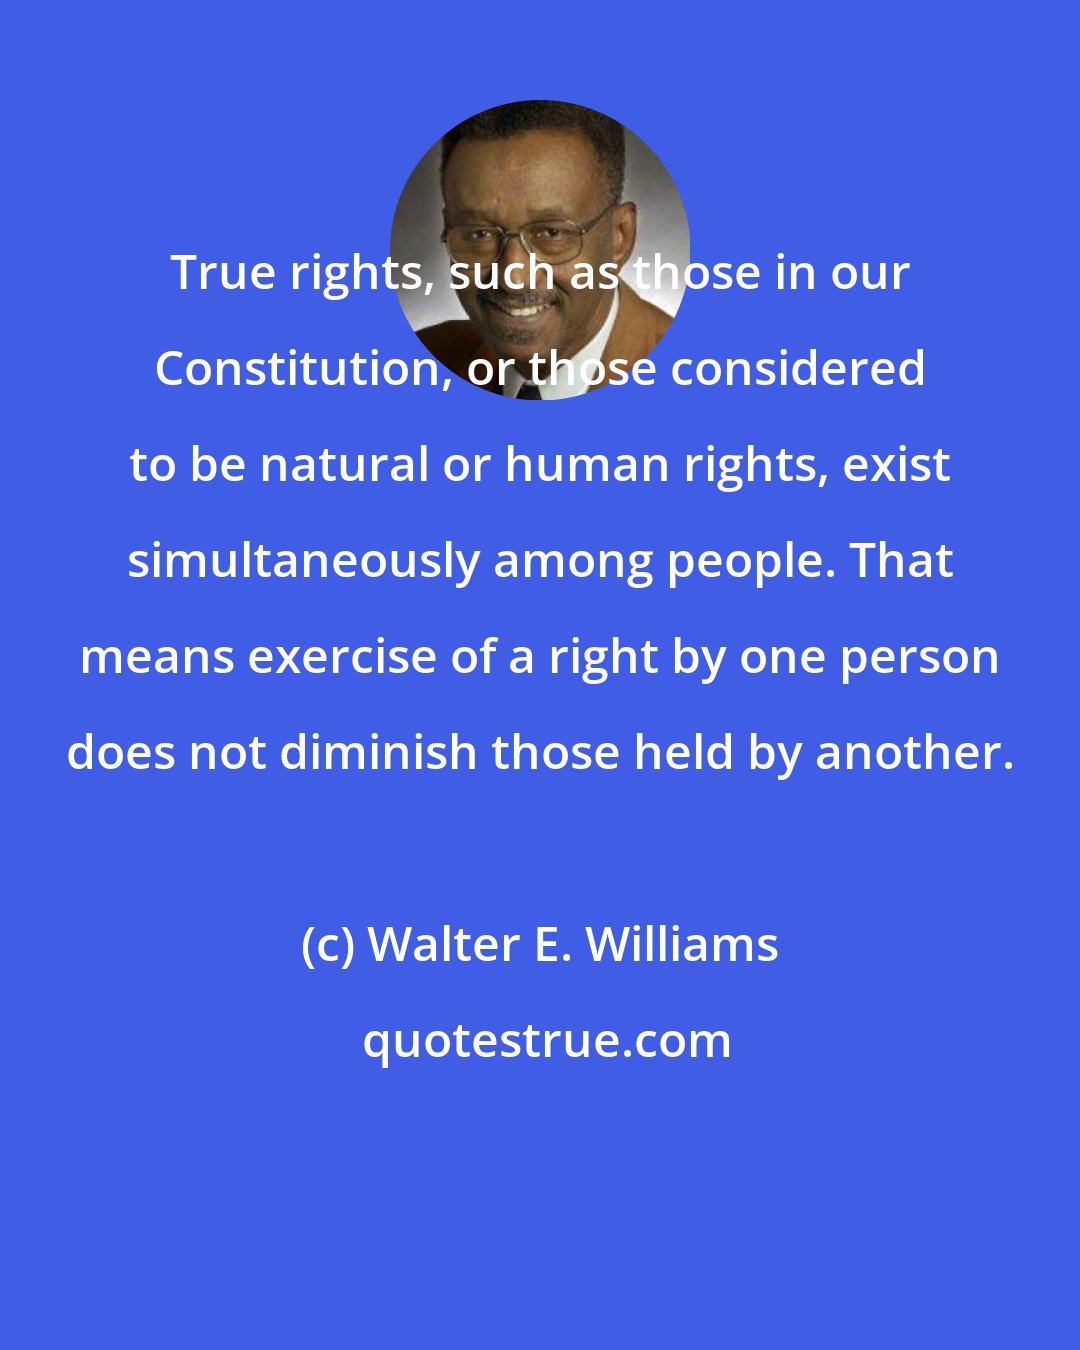 Walter E. Williams: True rights, such as those in our Constitution, or those considered to be natural or human rights, exist simultaneously among people. That means exercise of a right by one person does not diminish those held by another.